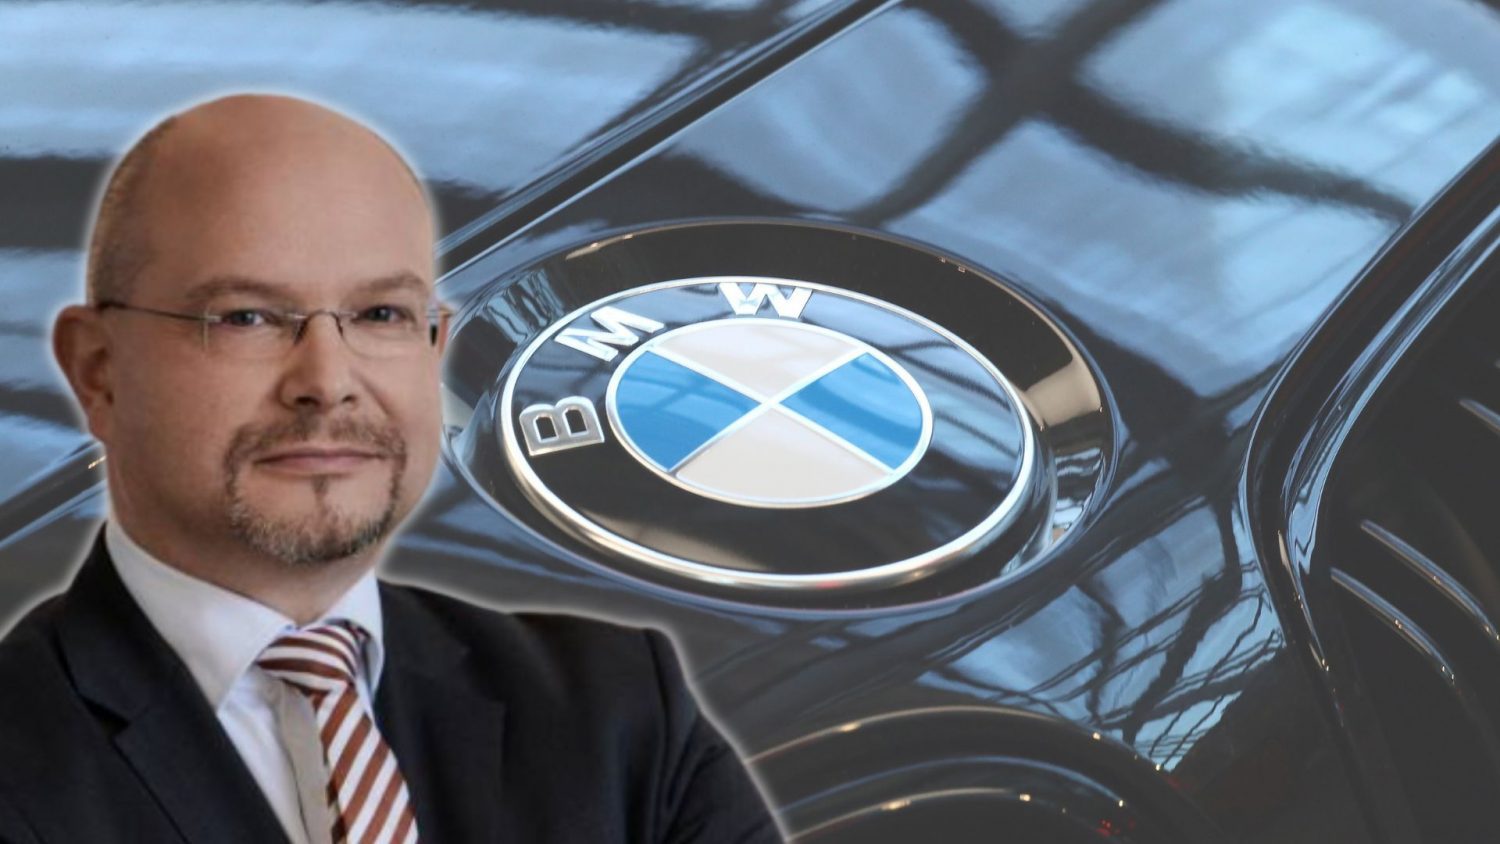 BMW has reached a turning point in its transition from gas-powered to EVs with predictions that EVs will make up most of the company's growtt